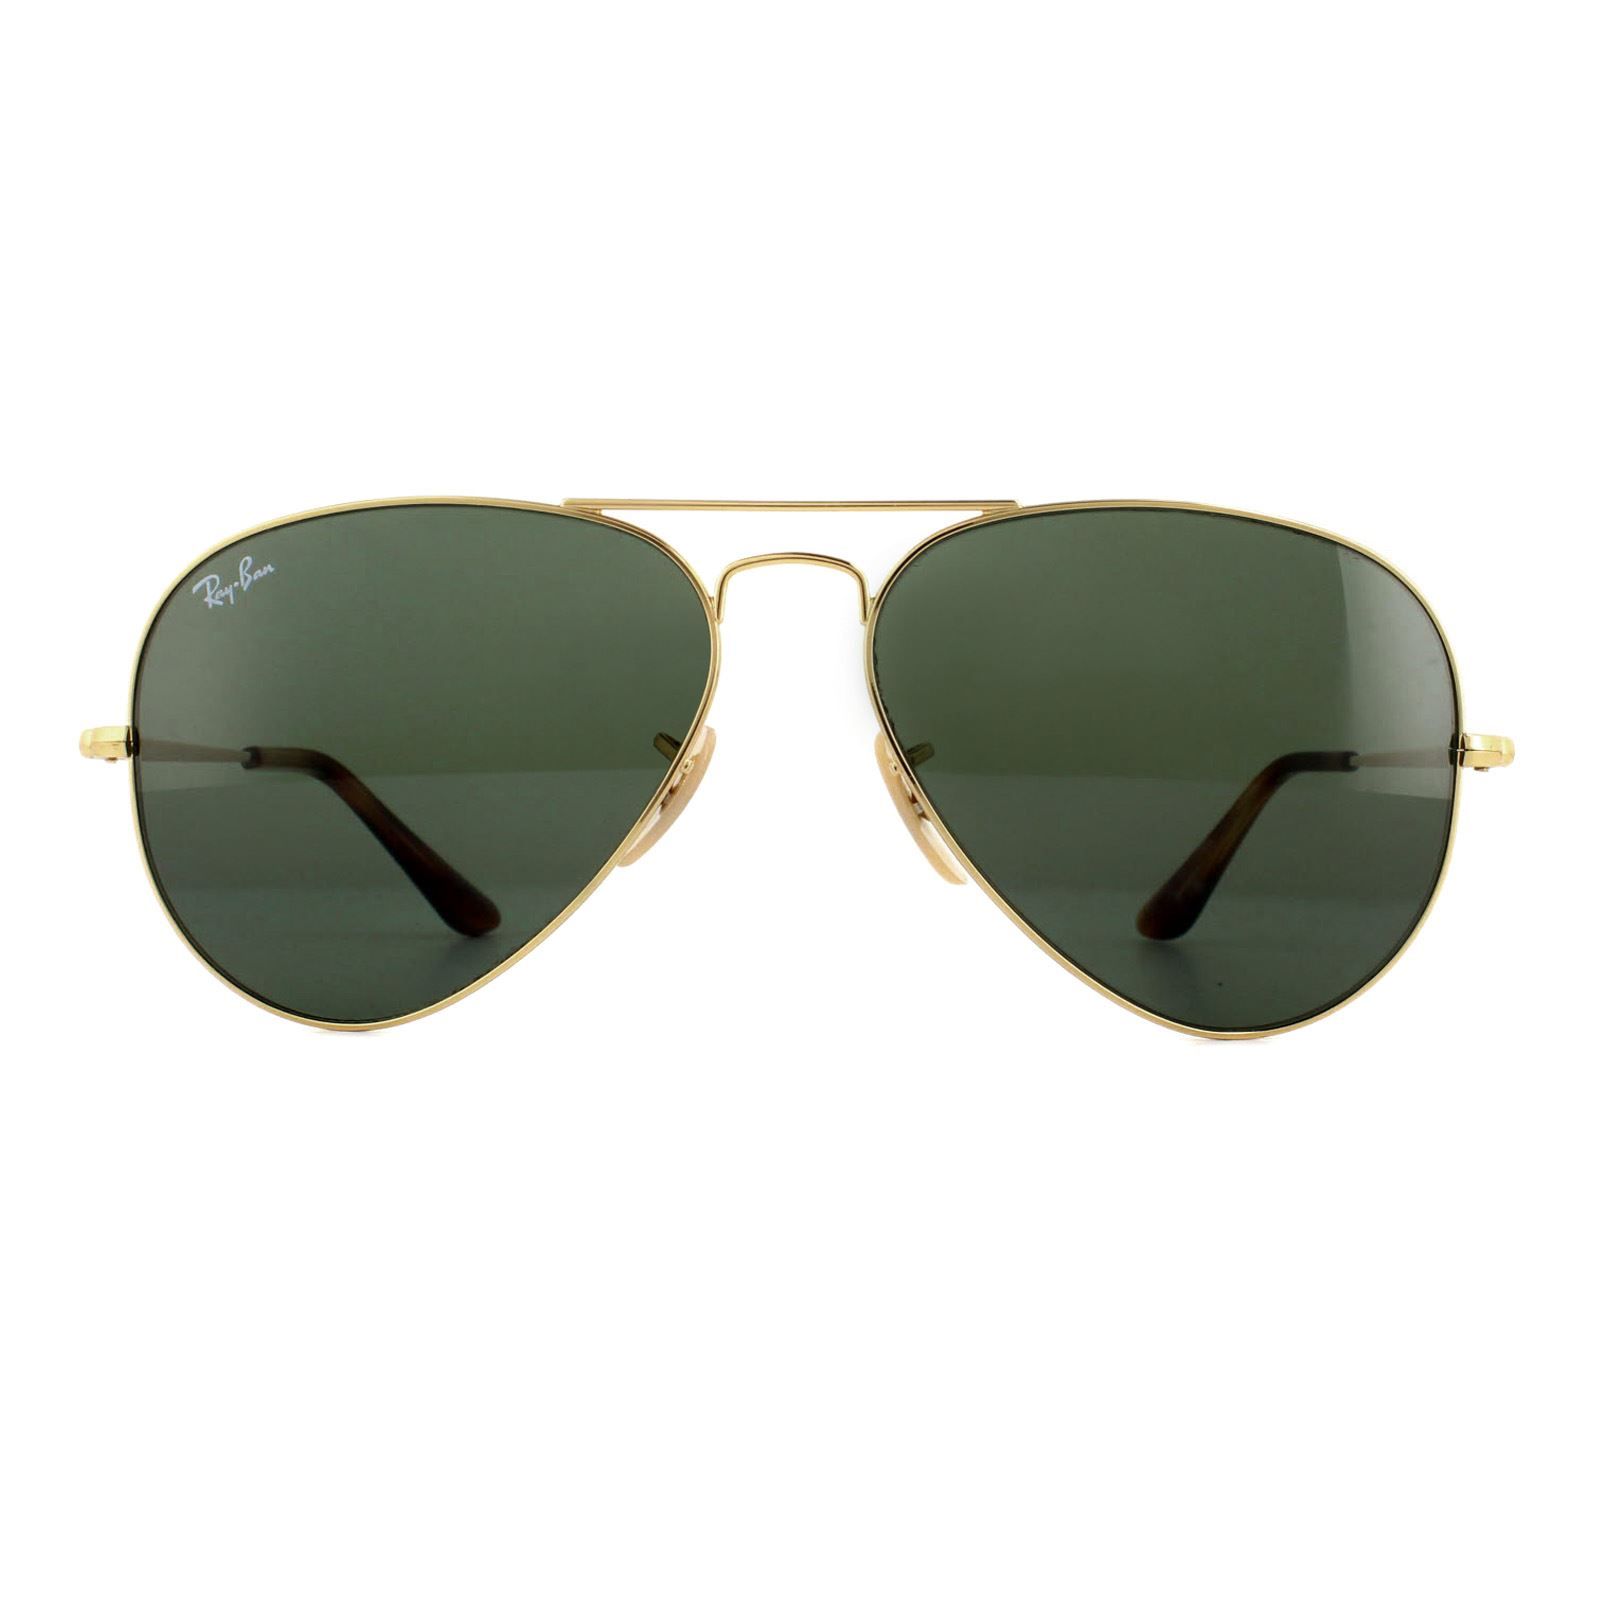 Ray-Ban Sunglasses Aviator Metal II RB3689 914731 Gold Green are an update of the classic Aviator. The 3689 are almost identical to the 3025 Aviator, but with new flat temples. The legendary Aviator is characterised by the iconic teardrop shaped lenses and double bridge. Plastic temple tips and adjustable nose pads ensure comfort and this model is available in two sizes; small and medium so you are guaranteed to find a pair that are perfect for you!